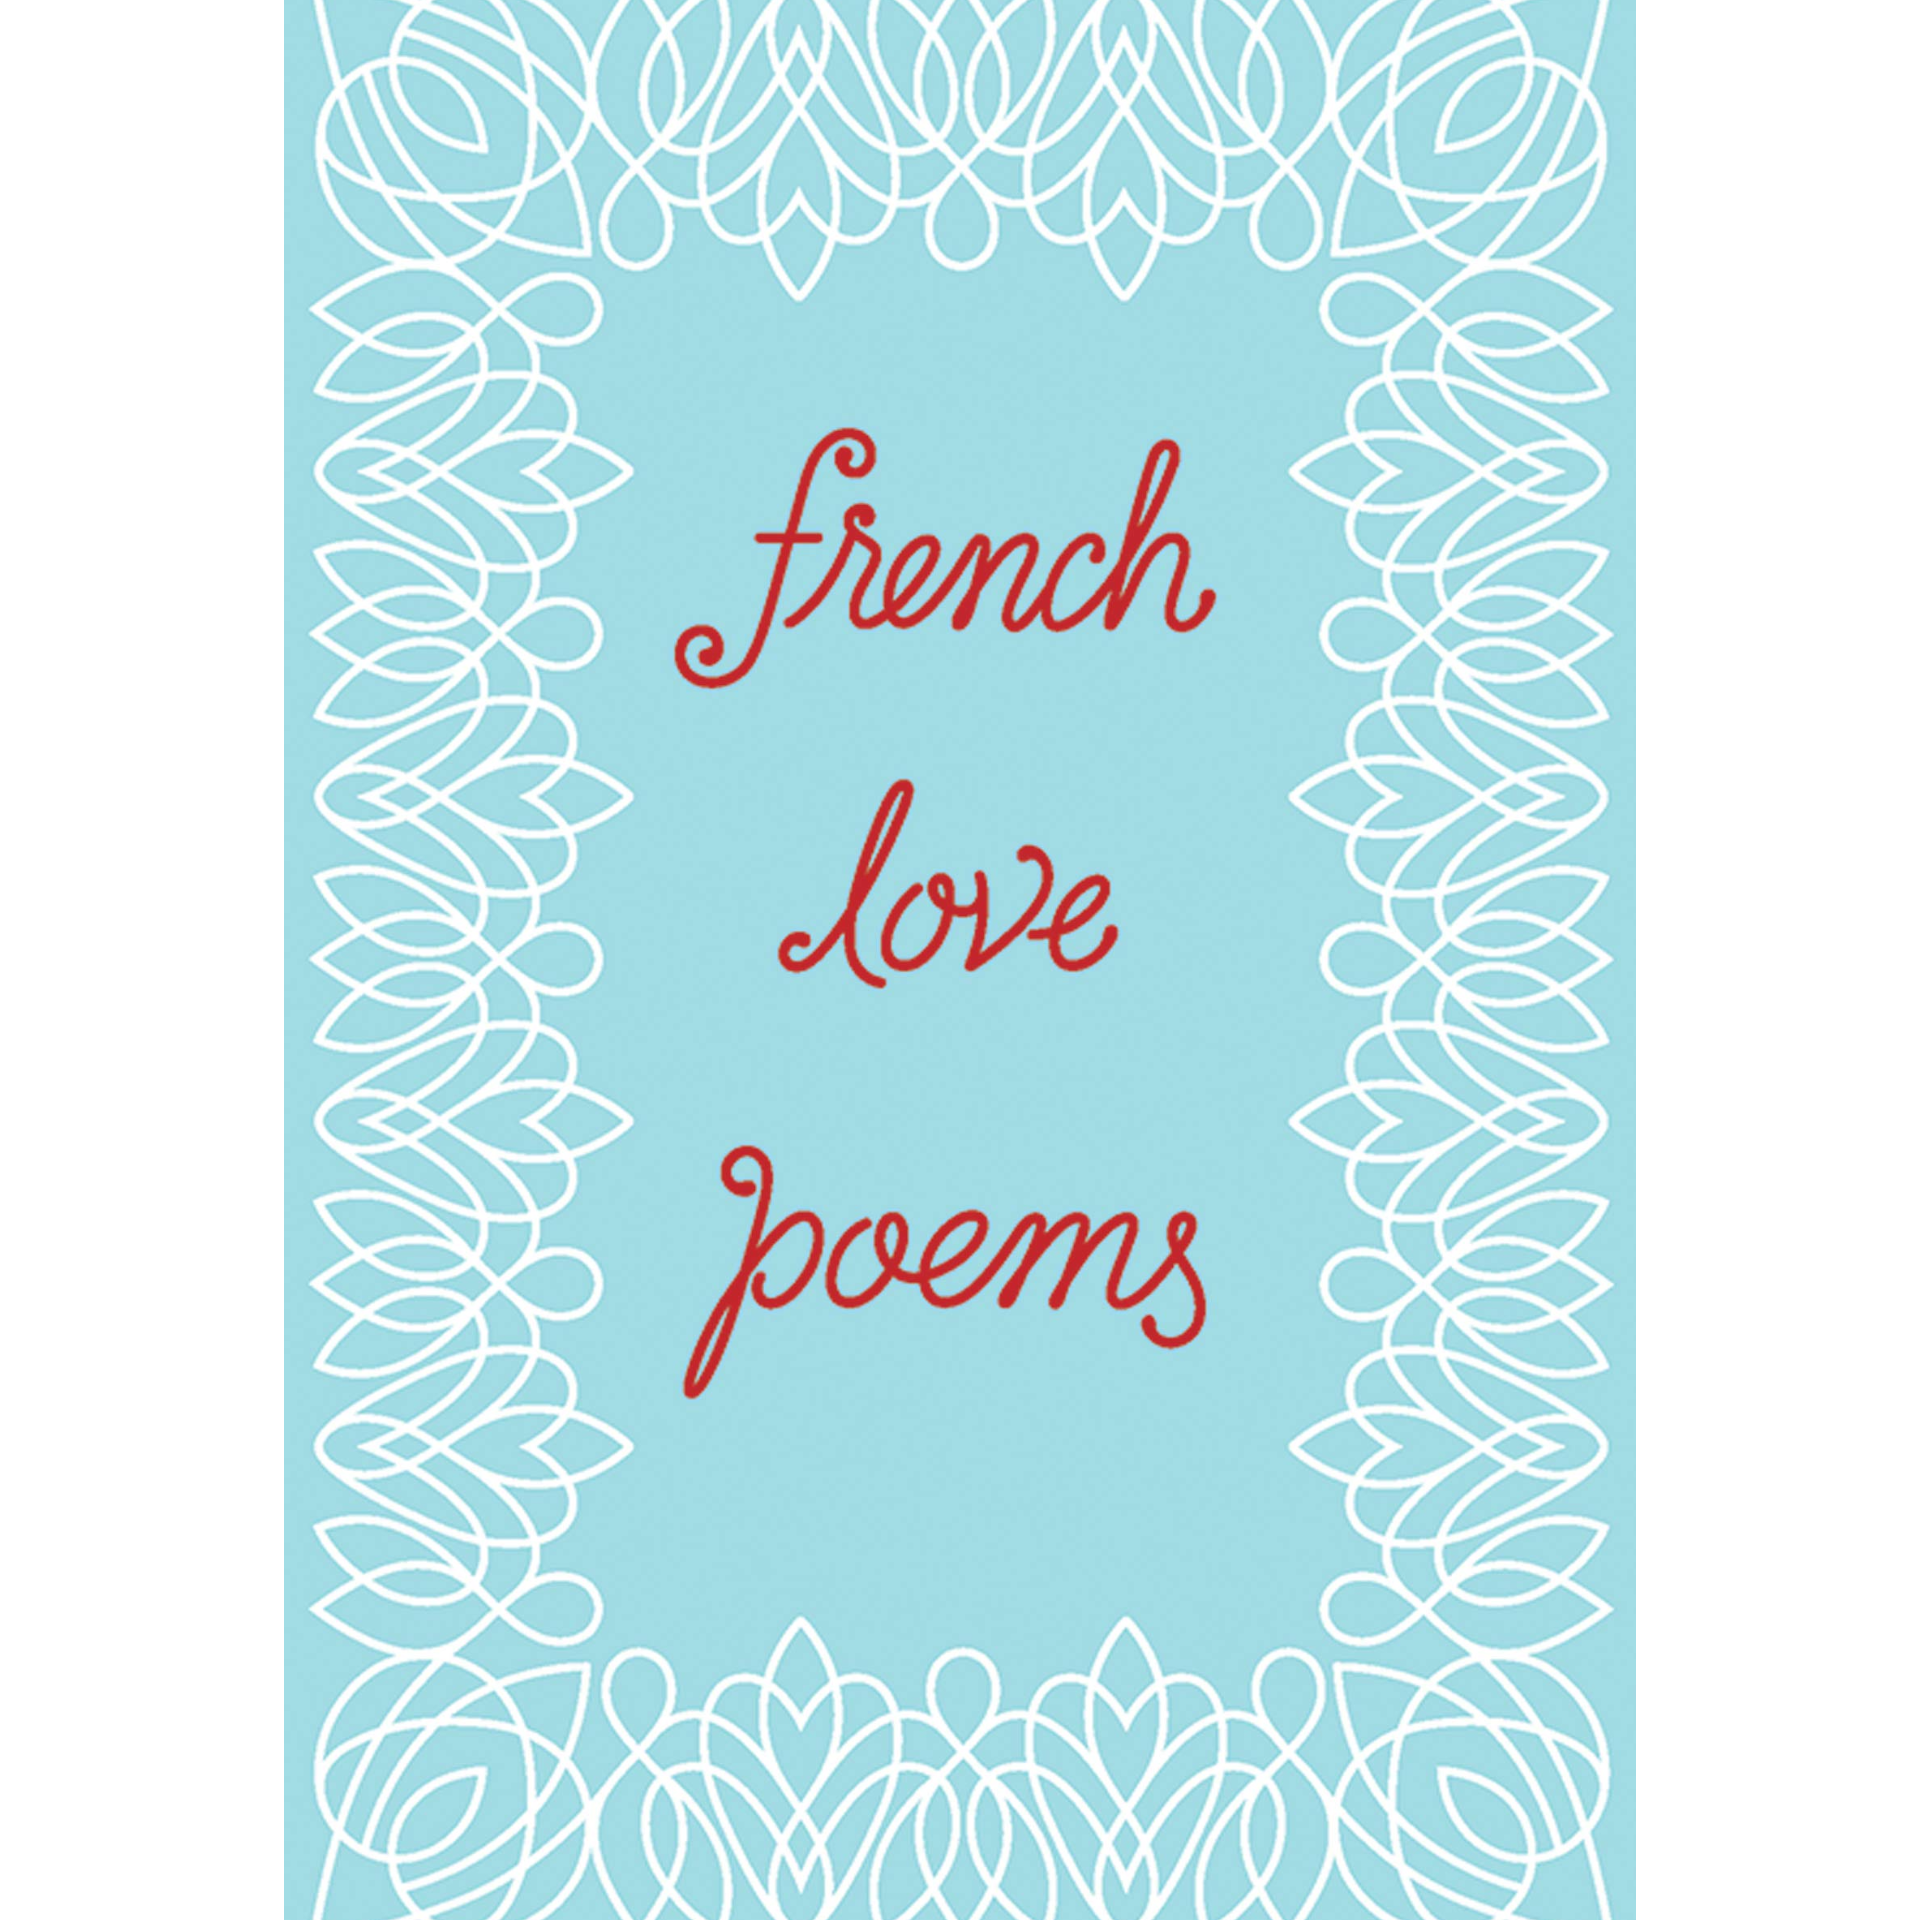 French Love Poems - DIGS